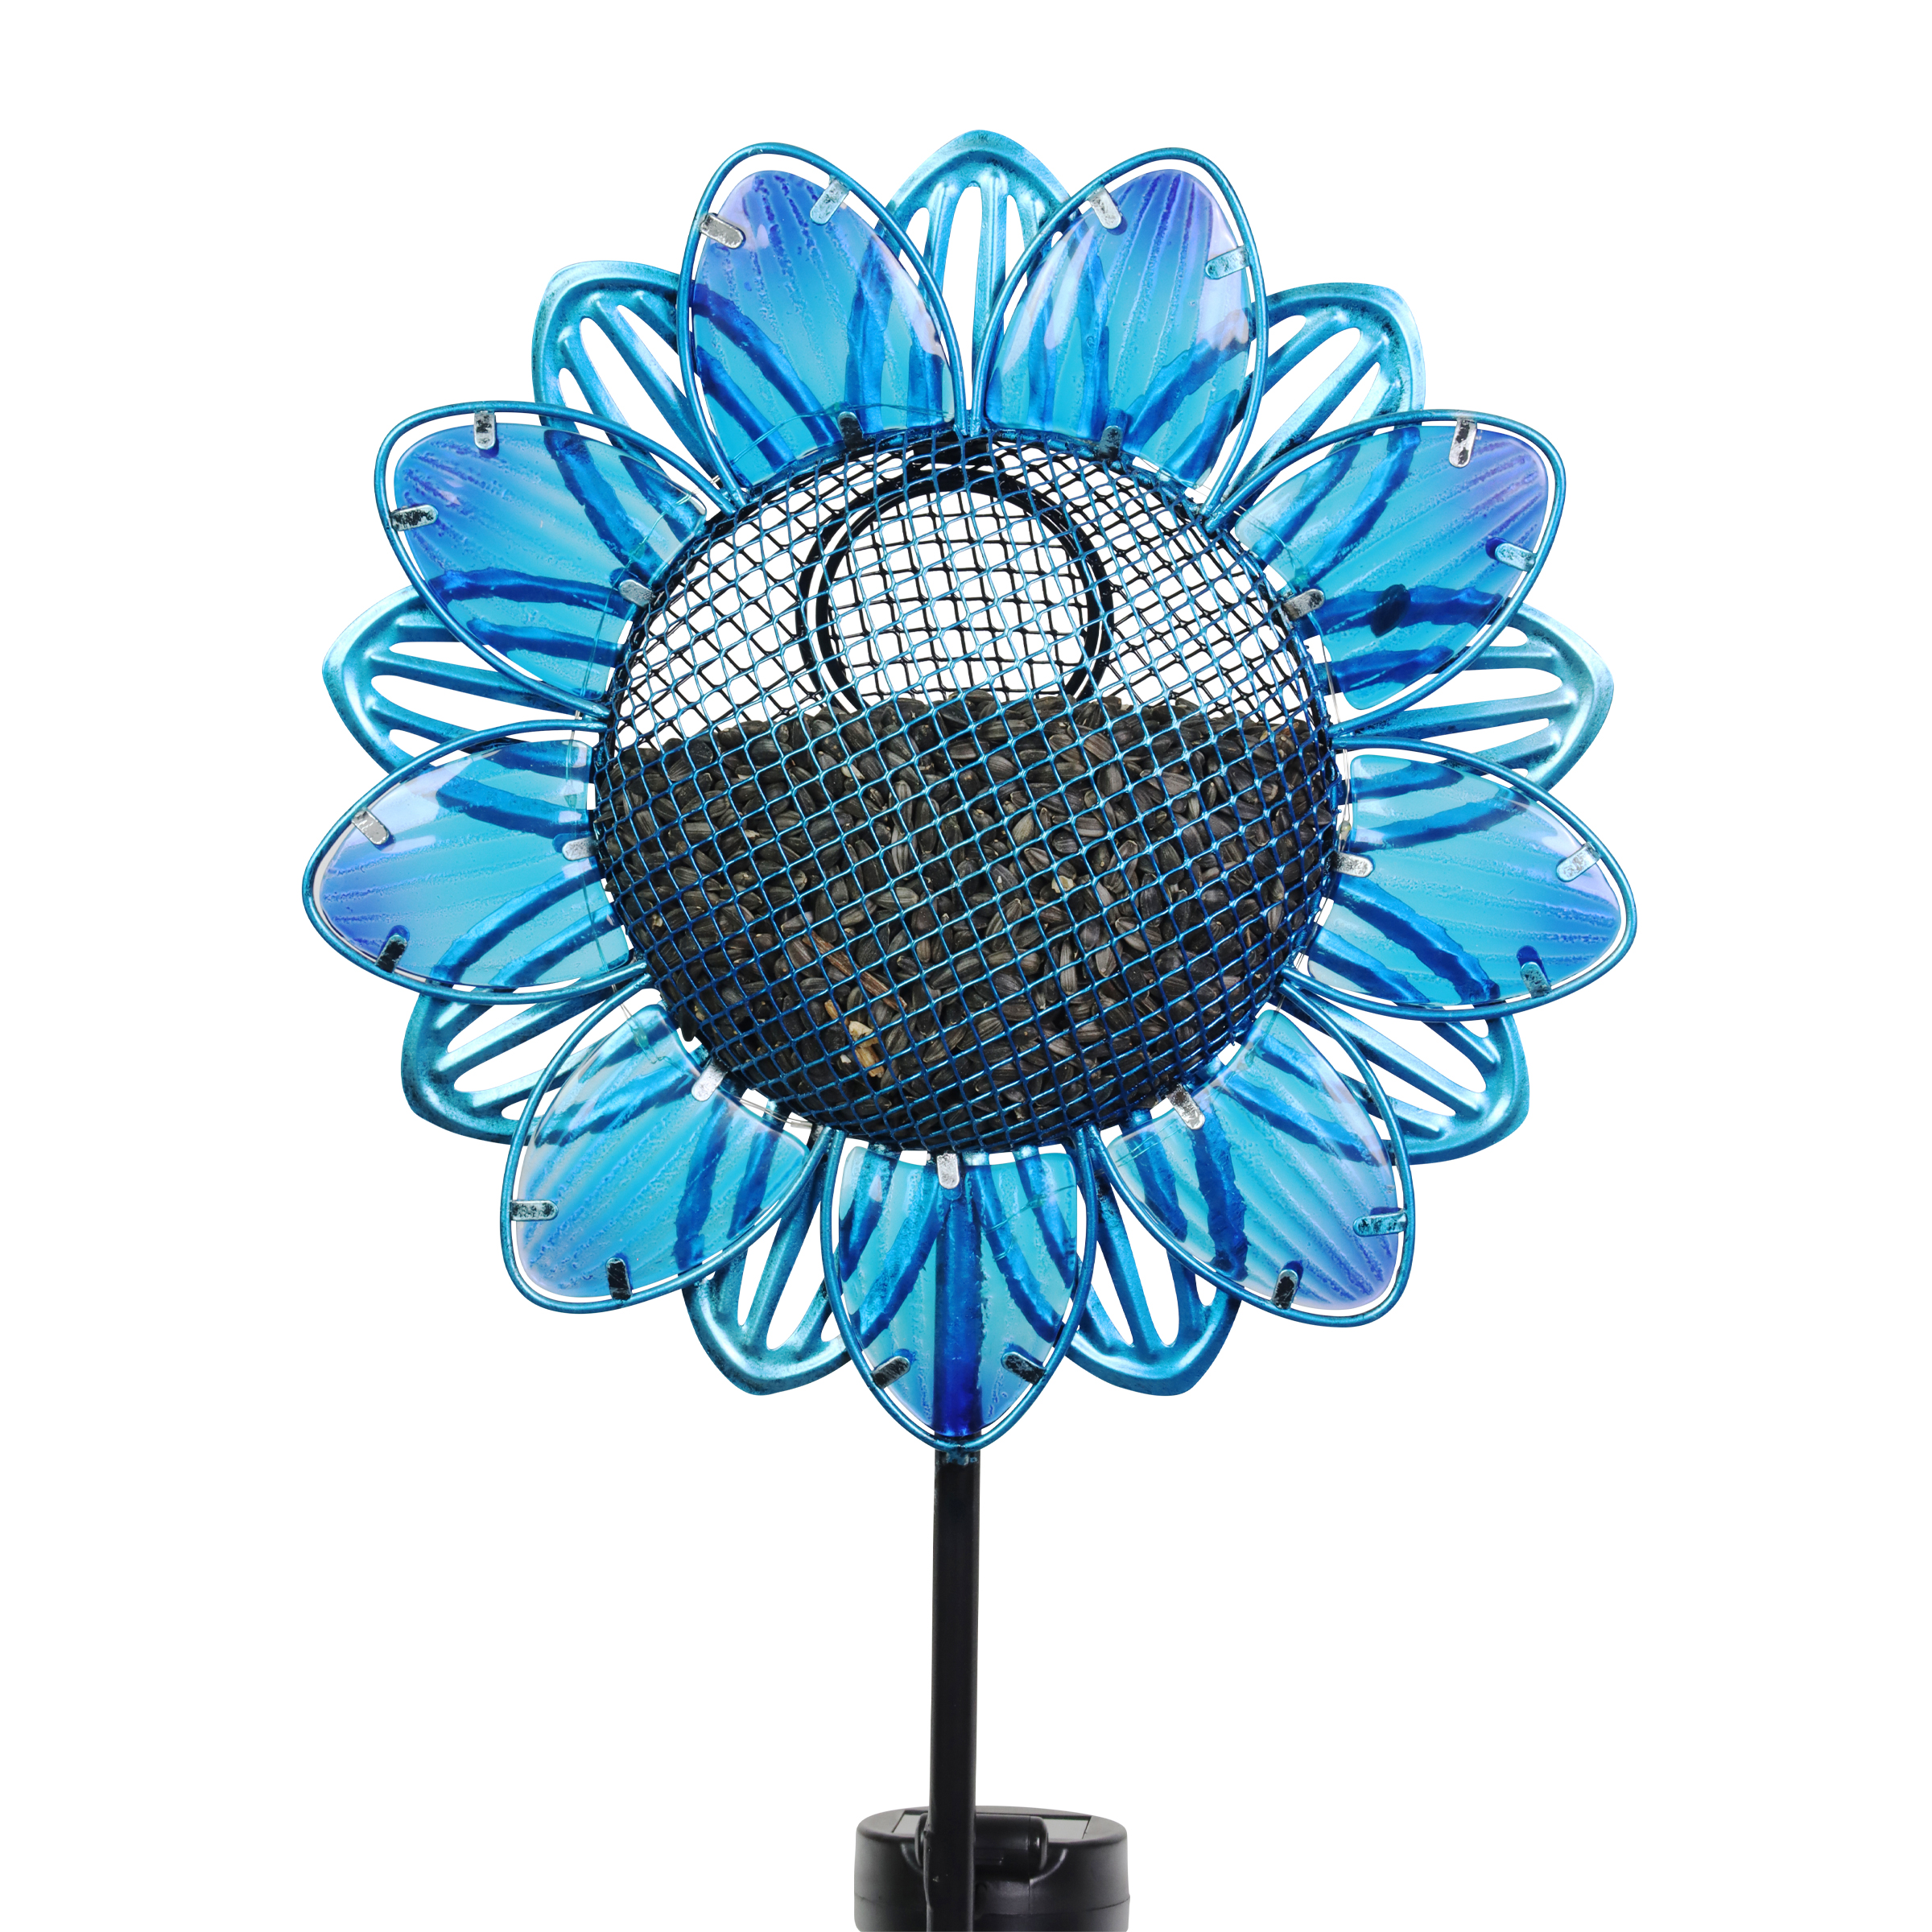 Exhart  Blue Sunflower Metal and Glass Bird Seed Feeder Solar Powered Garden Stake, 11 by 36 inches - image 1 of 7